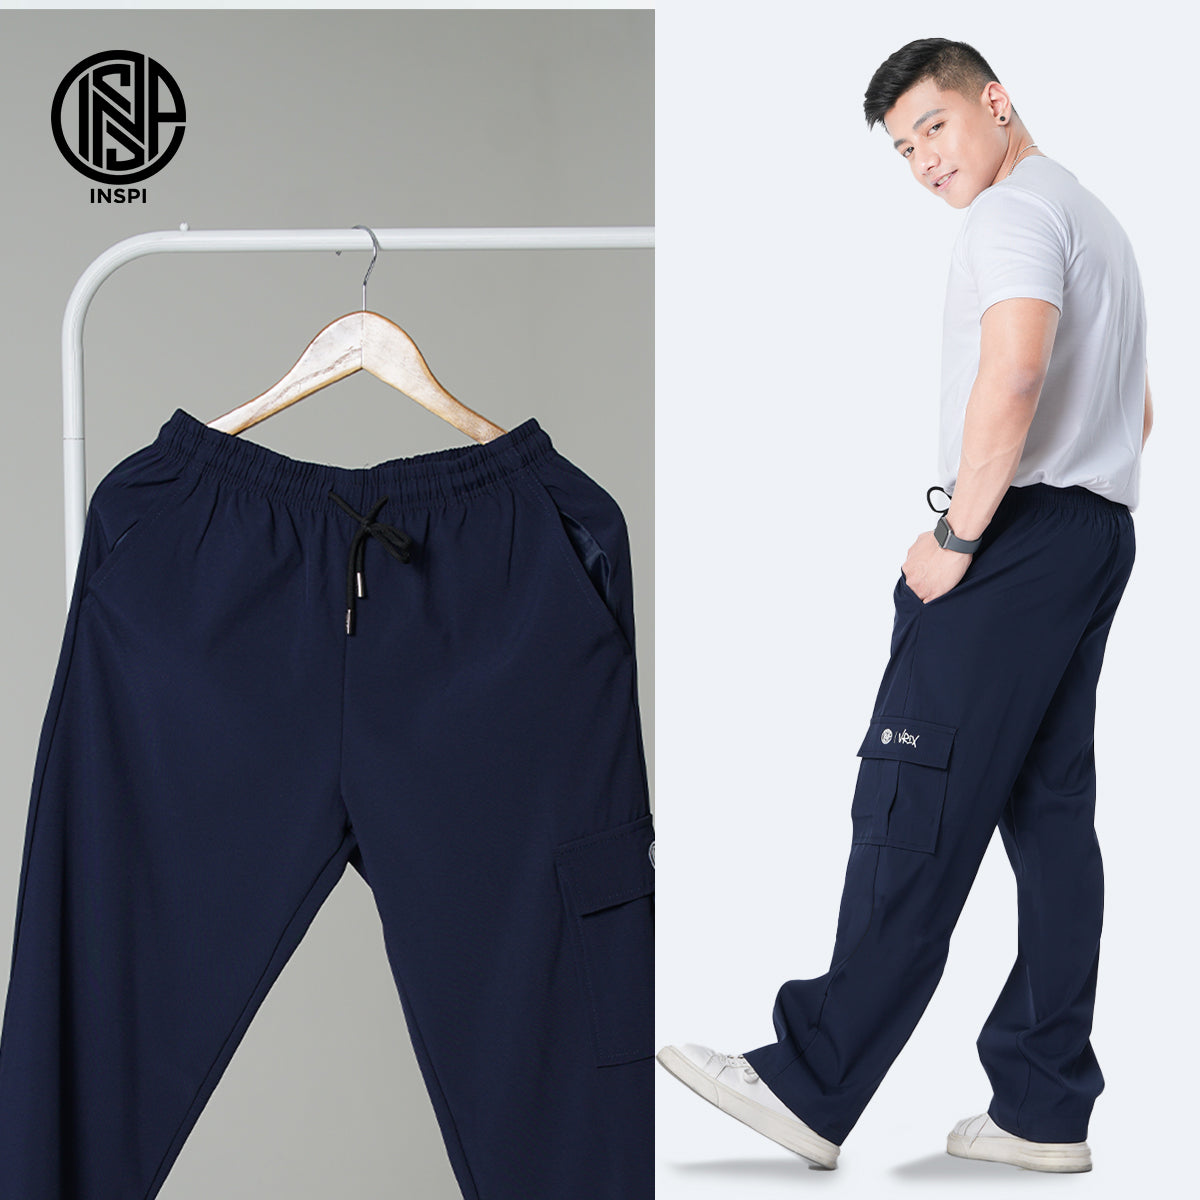 INSPI x Vrix Cargo Pants with Drawstring and Pockets.